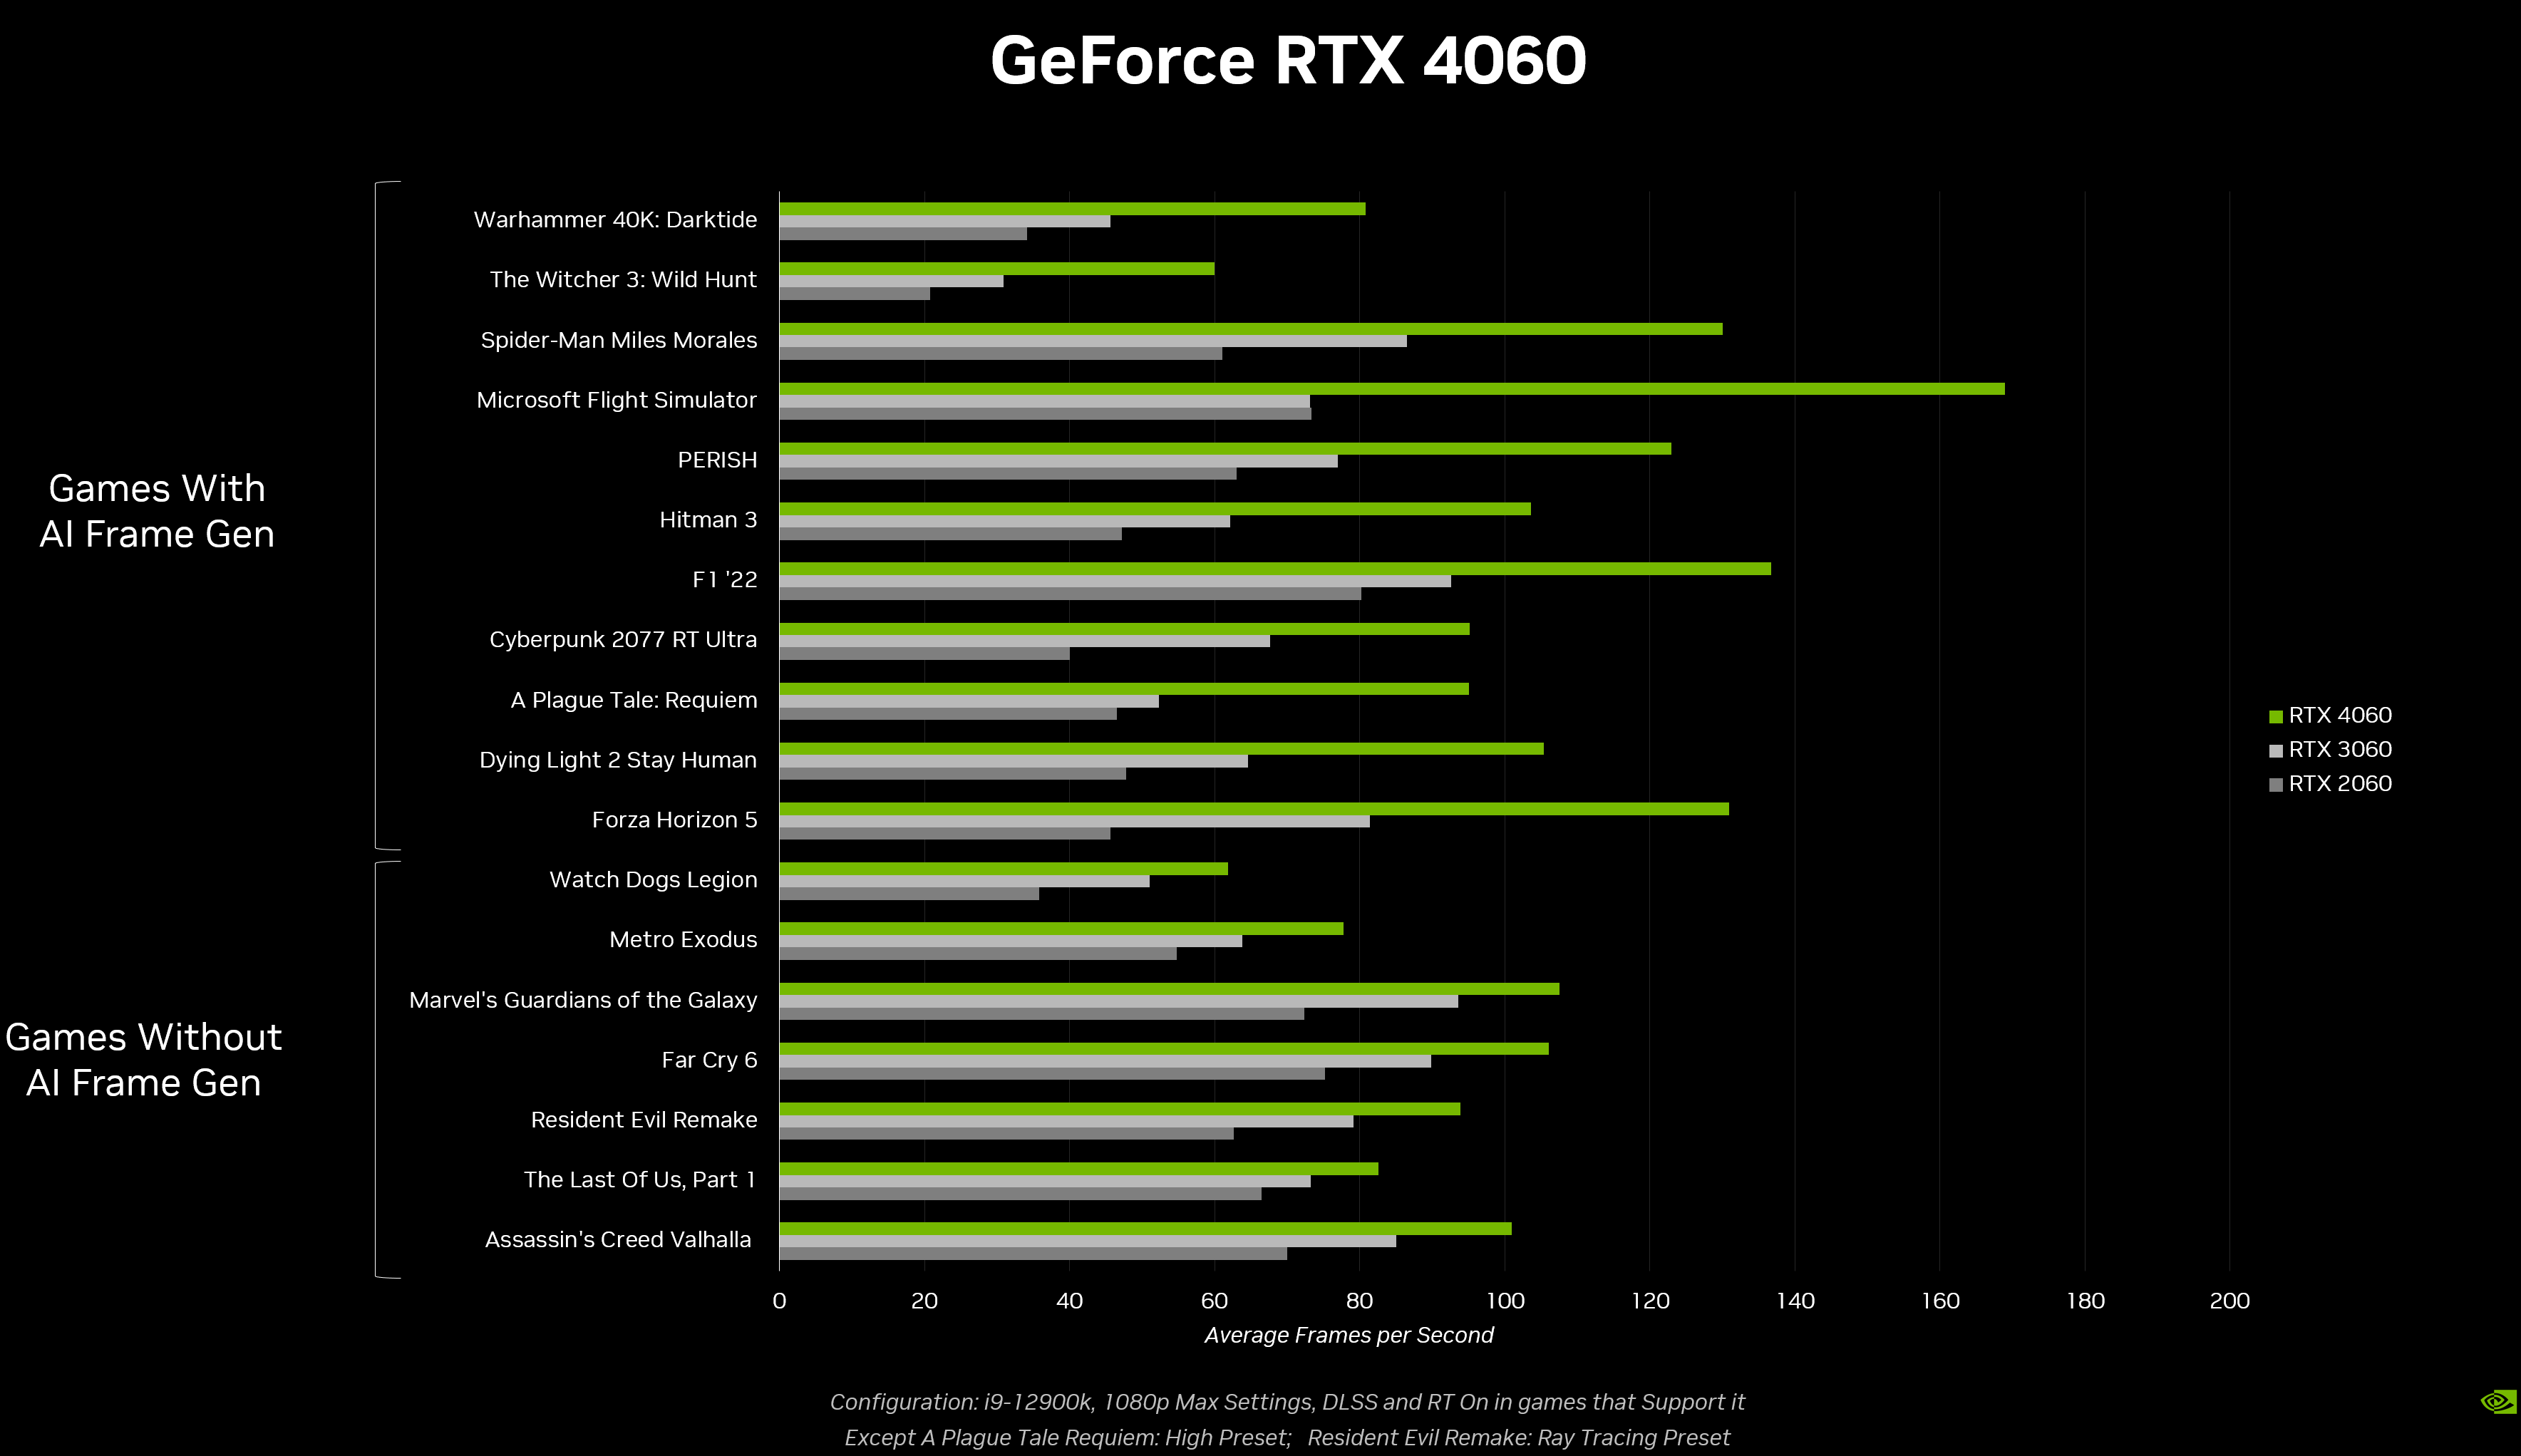 NVIDIA claims GeForce RTX 4060 is 20% faster than RTX 3060 without